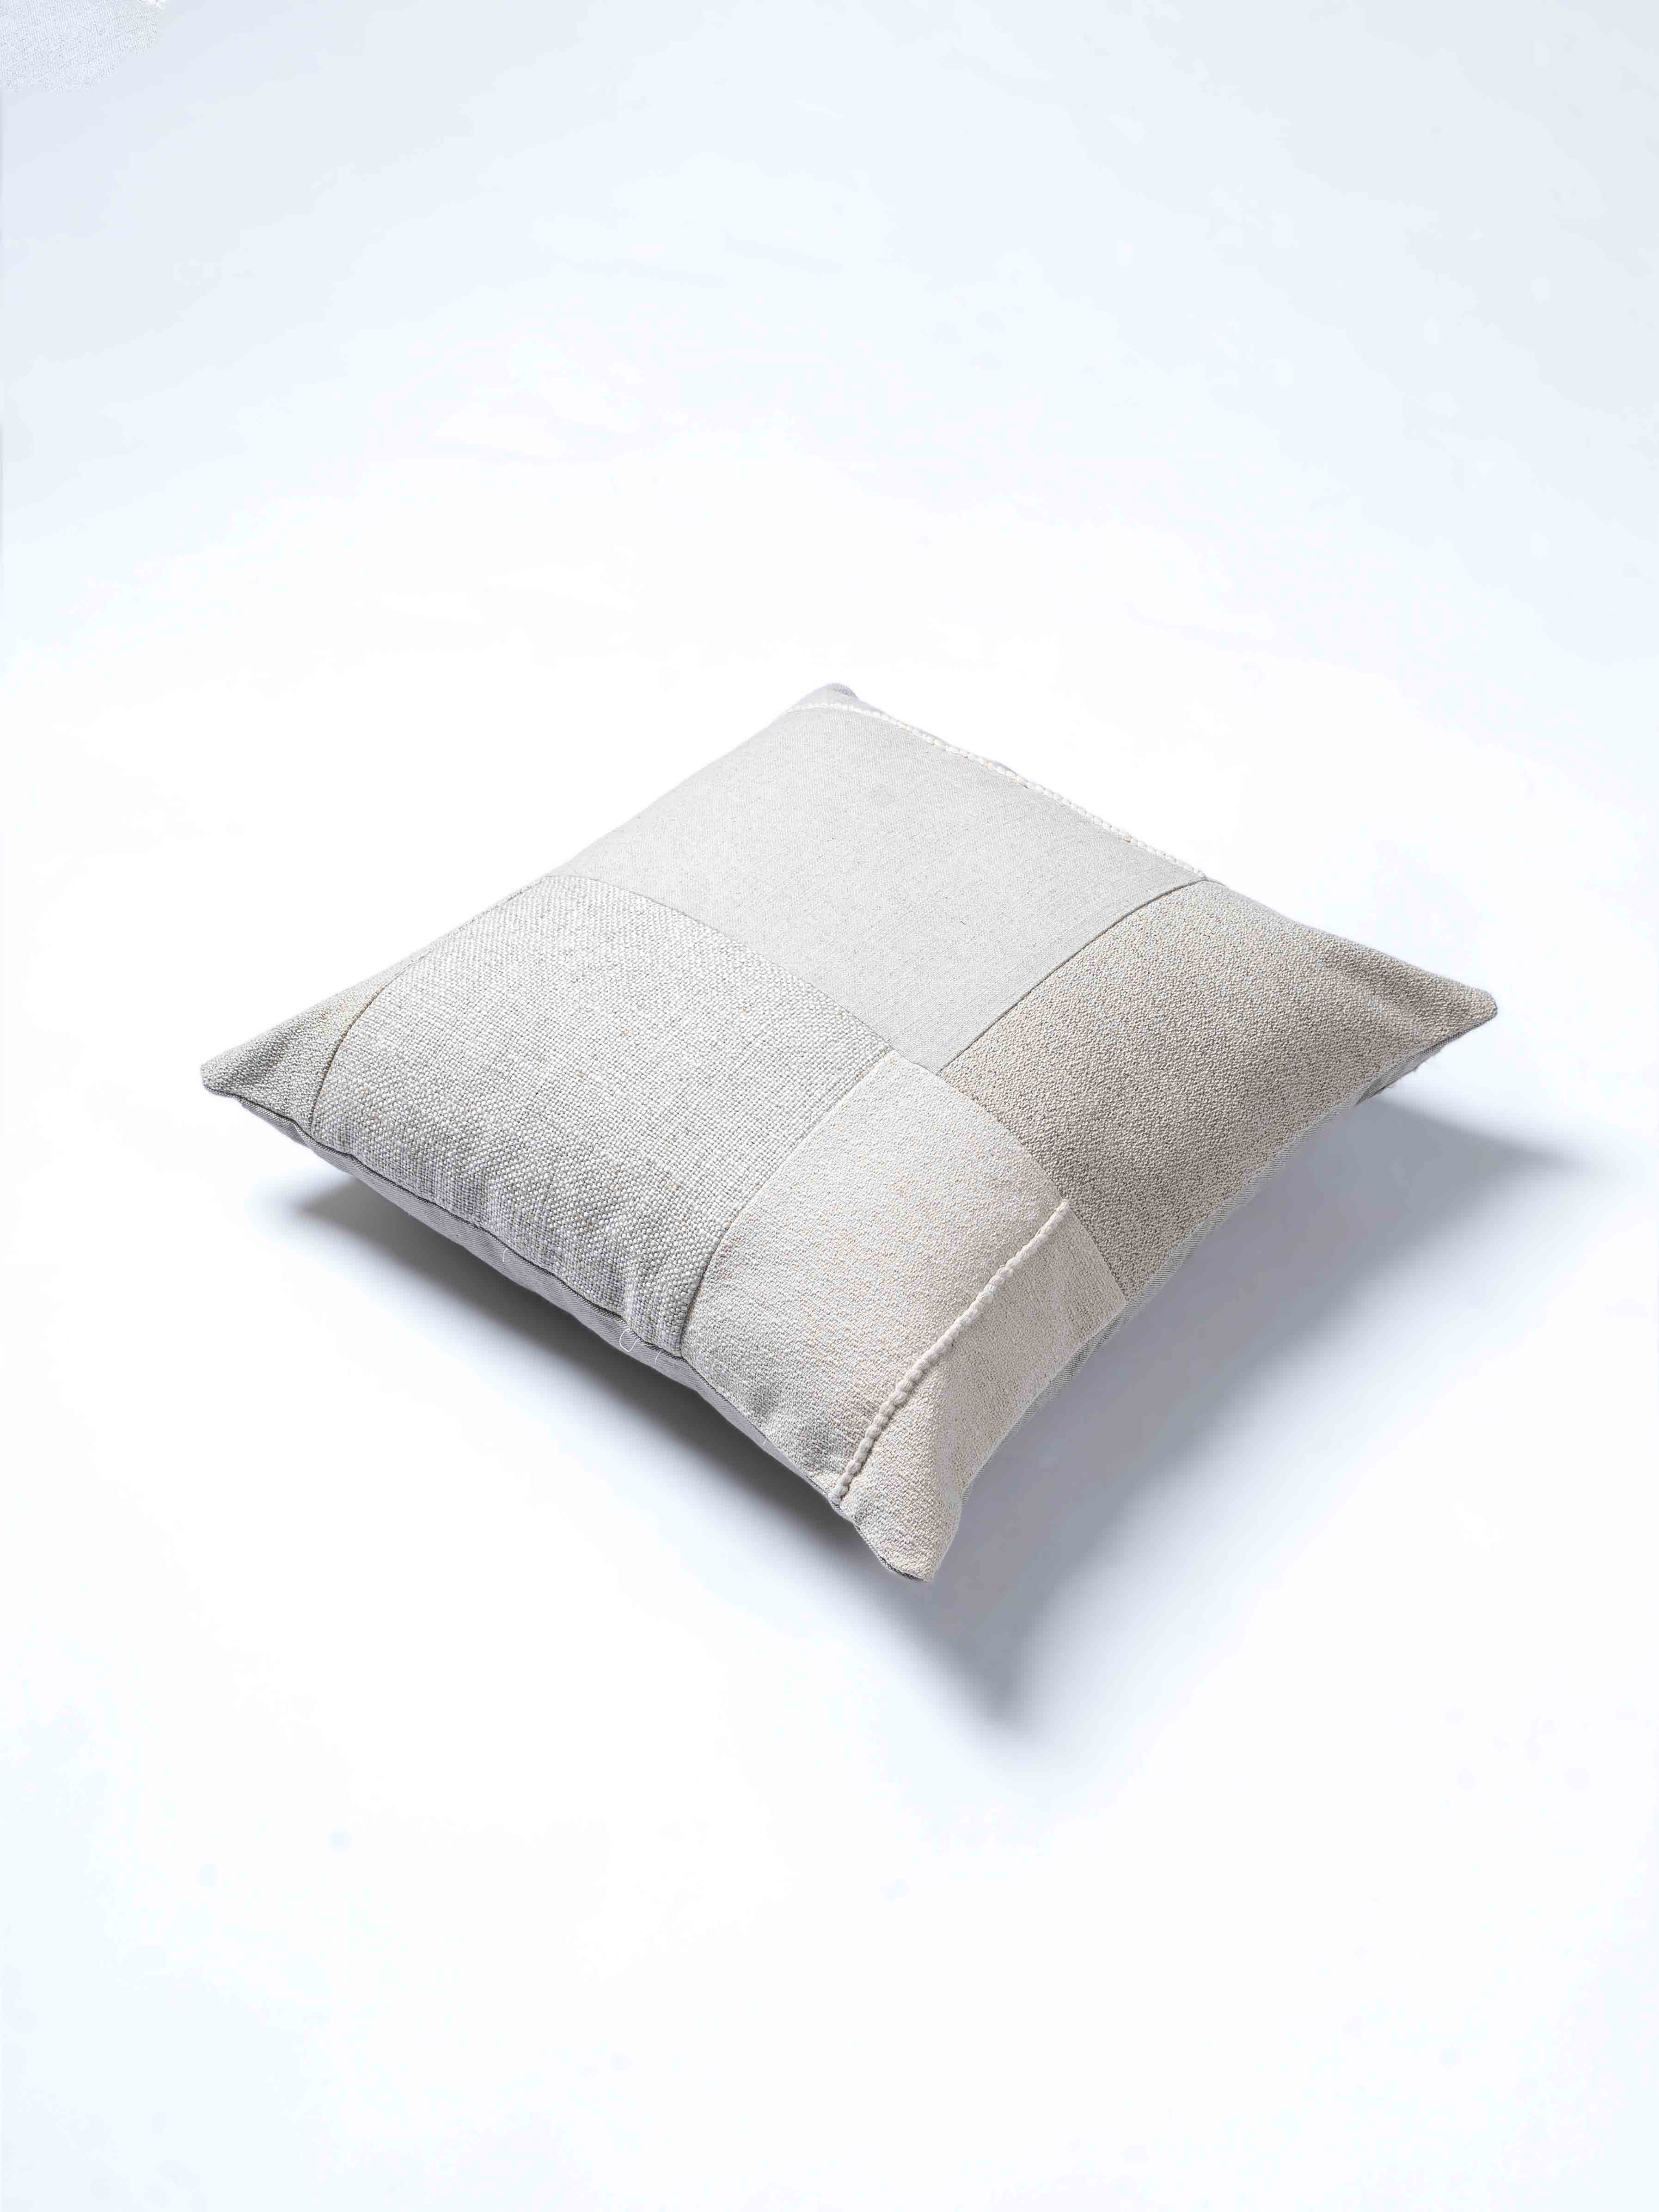 Xantin Neutral Patch Cushion Cover with Hand Embroidery